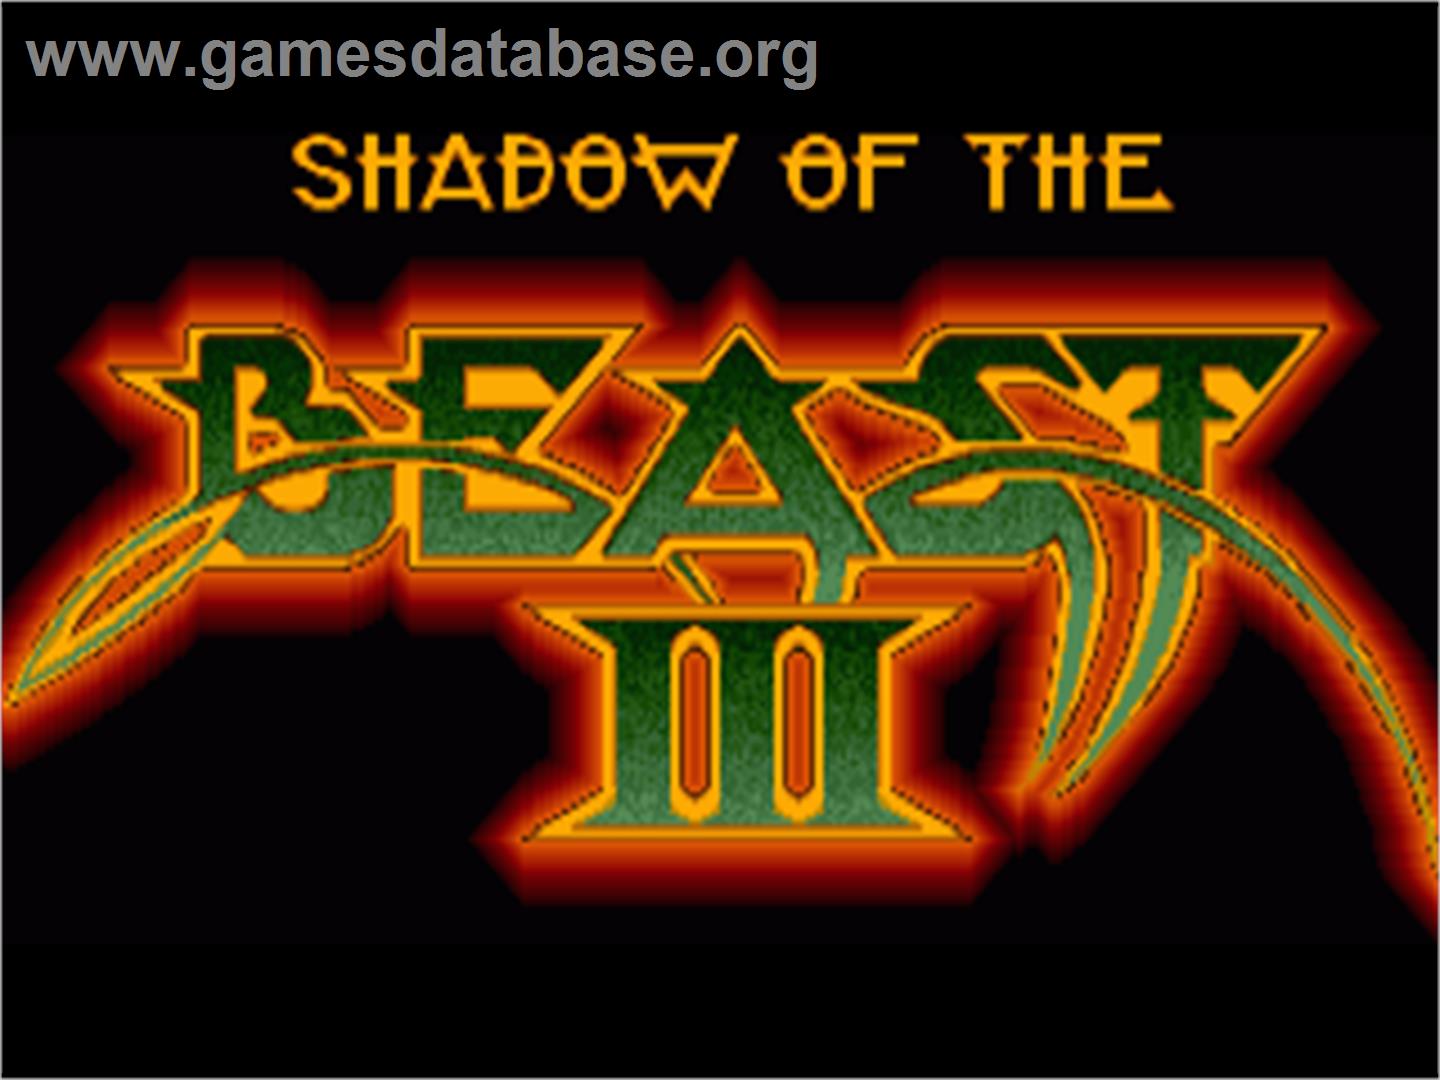 Shadow of the Beast 3: Out of the Shadow - Commodore Amiga - Artwork - Title Screen